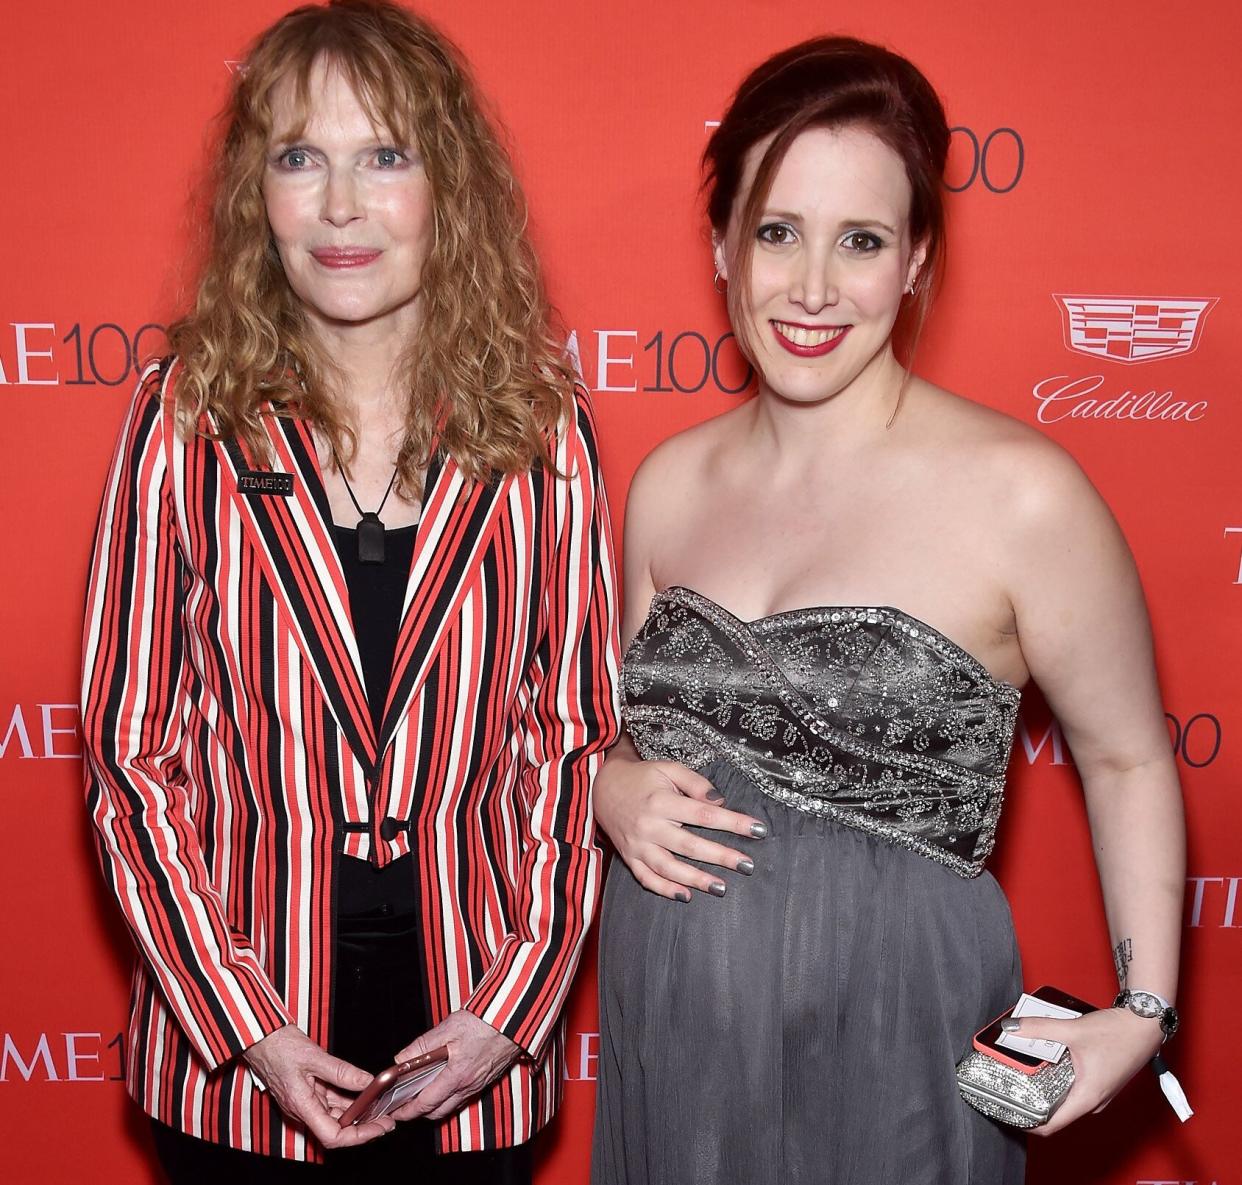 Mia Farrow and her daughter Dylan Farrow attend the 2016 Time 100 Gala. (Photo: Dimitrios Kambouris via Getty Images)